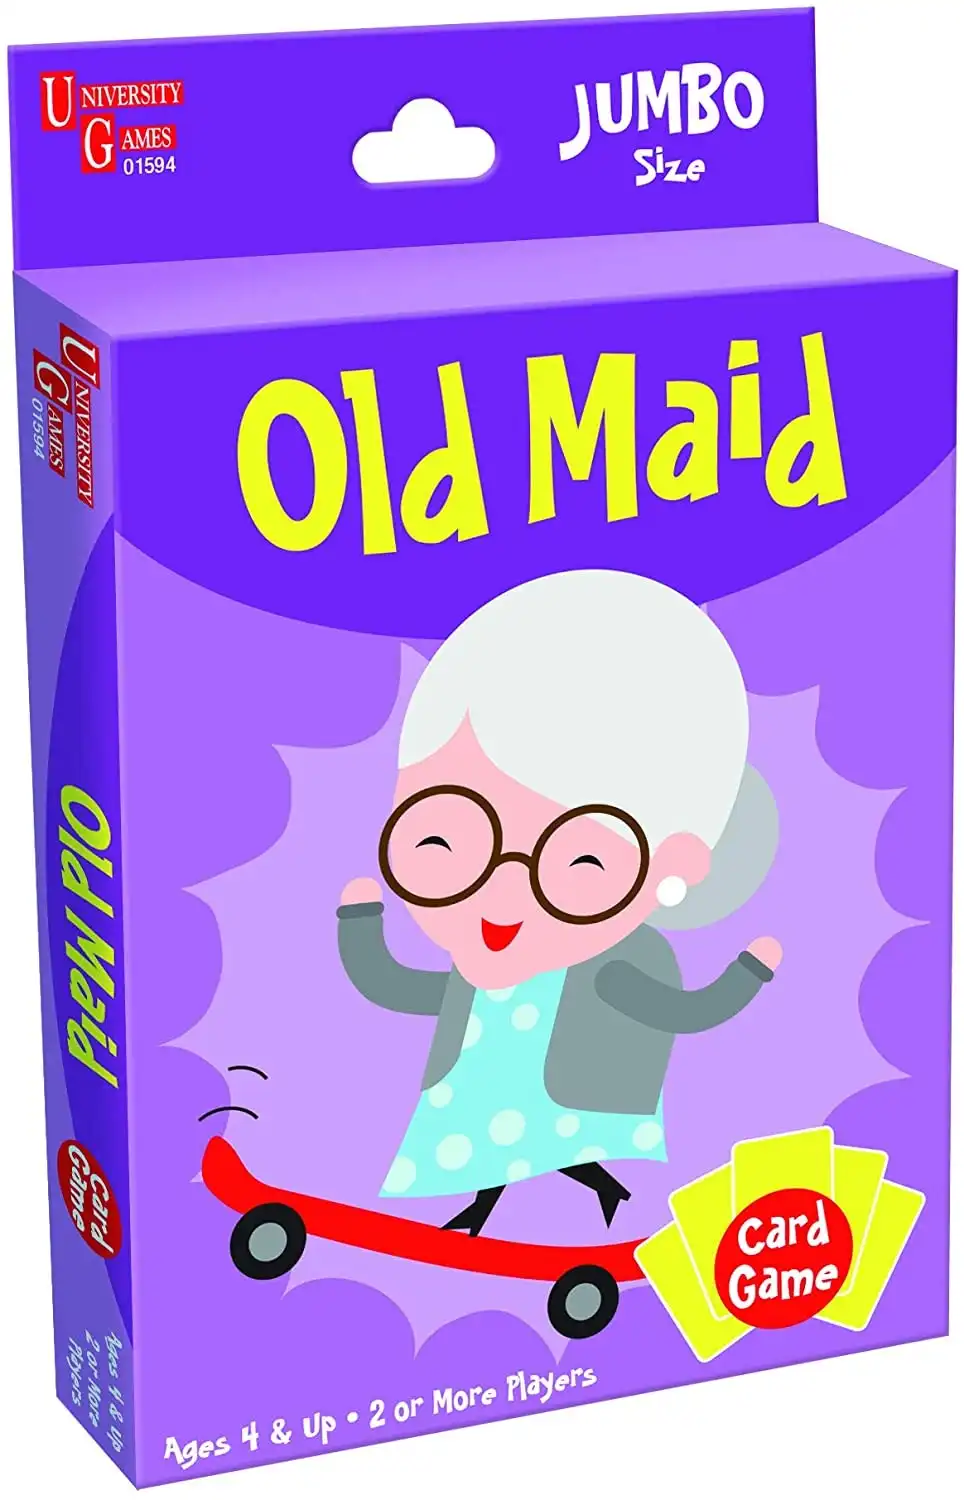 Old Maid Card Game Jumbo Size - University Games